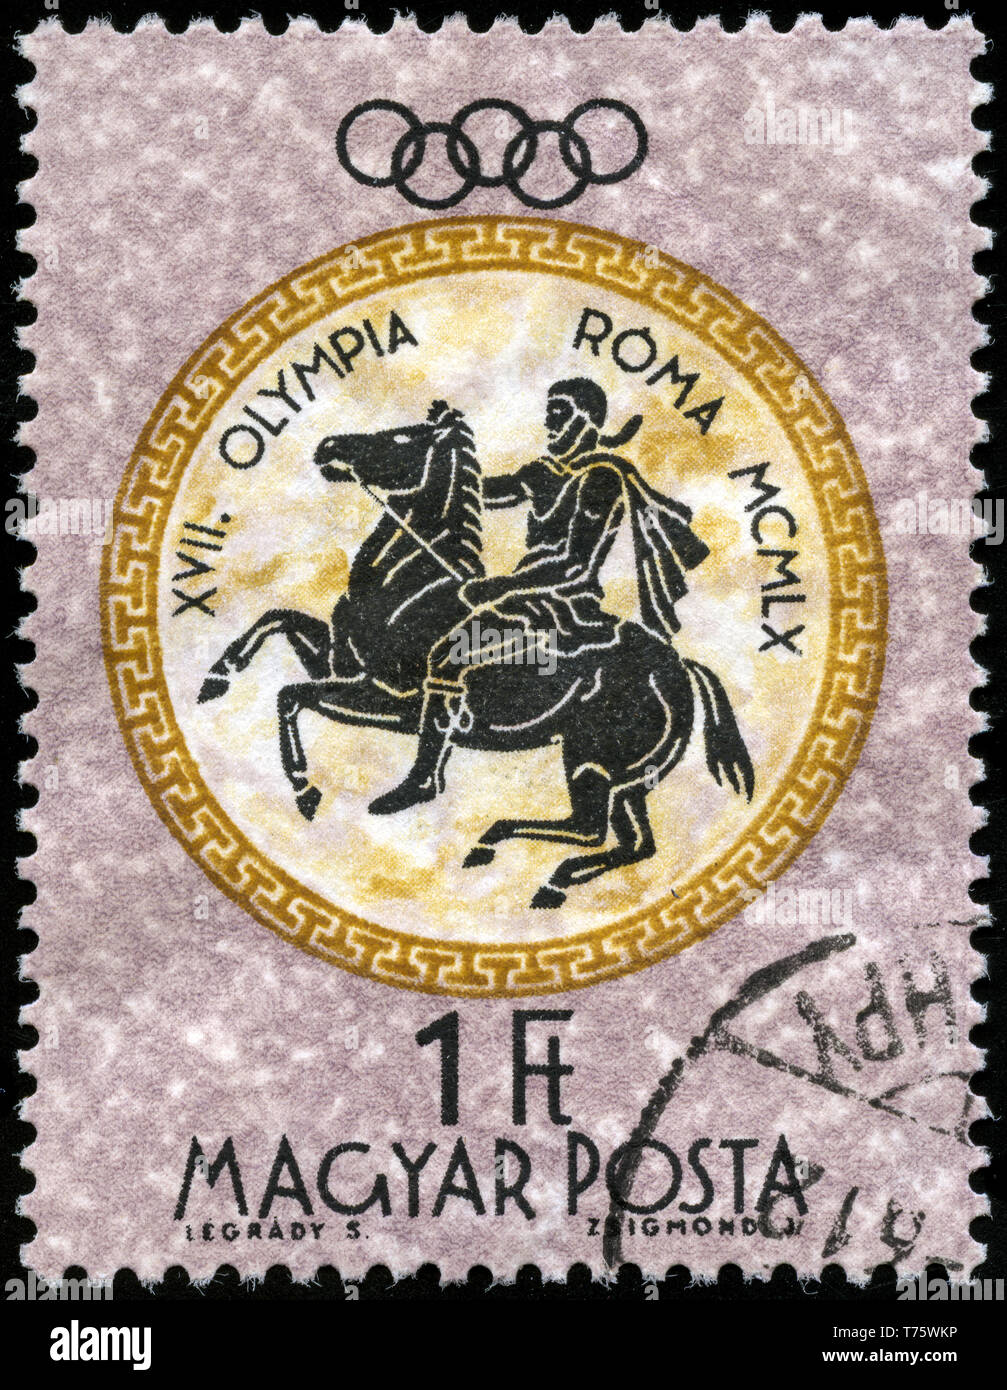 Postage stamp from Hungary in the Summer Olympic Games 1960 - Rome series Stock Photo